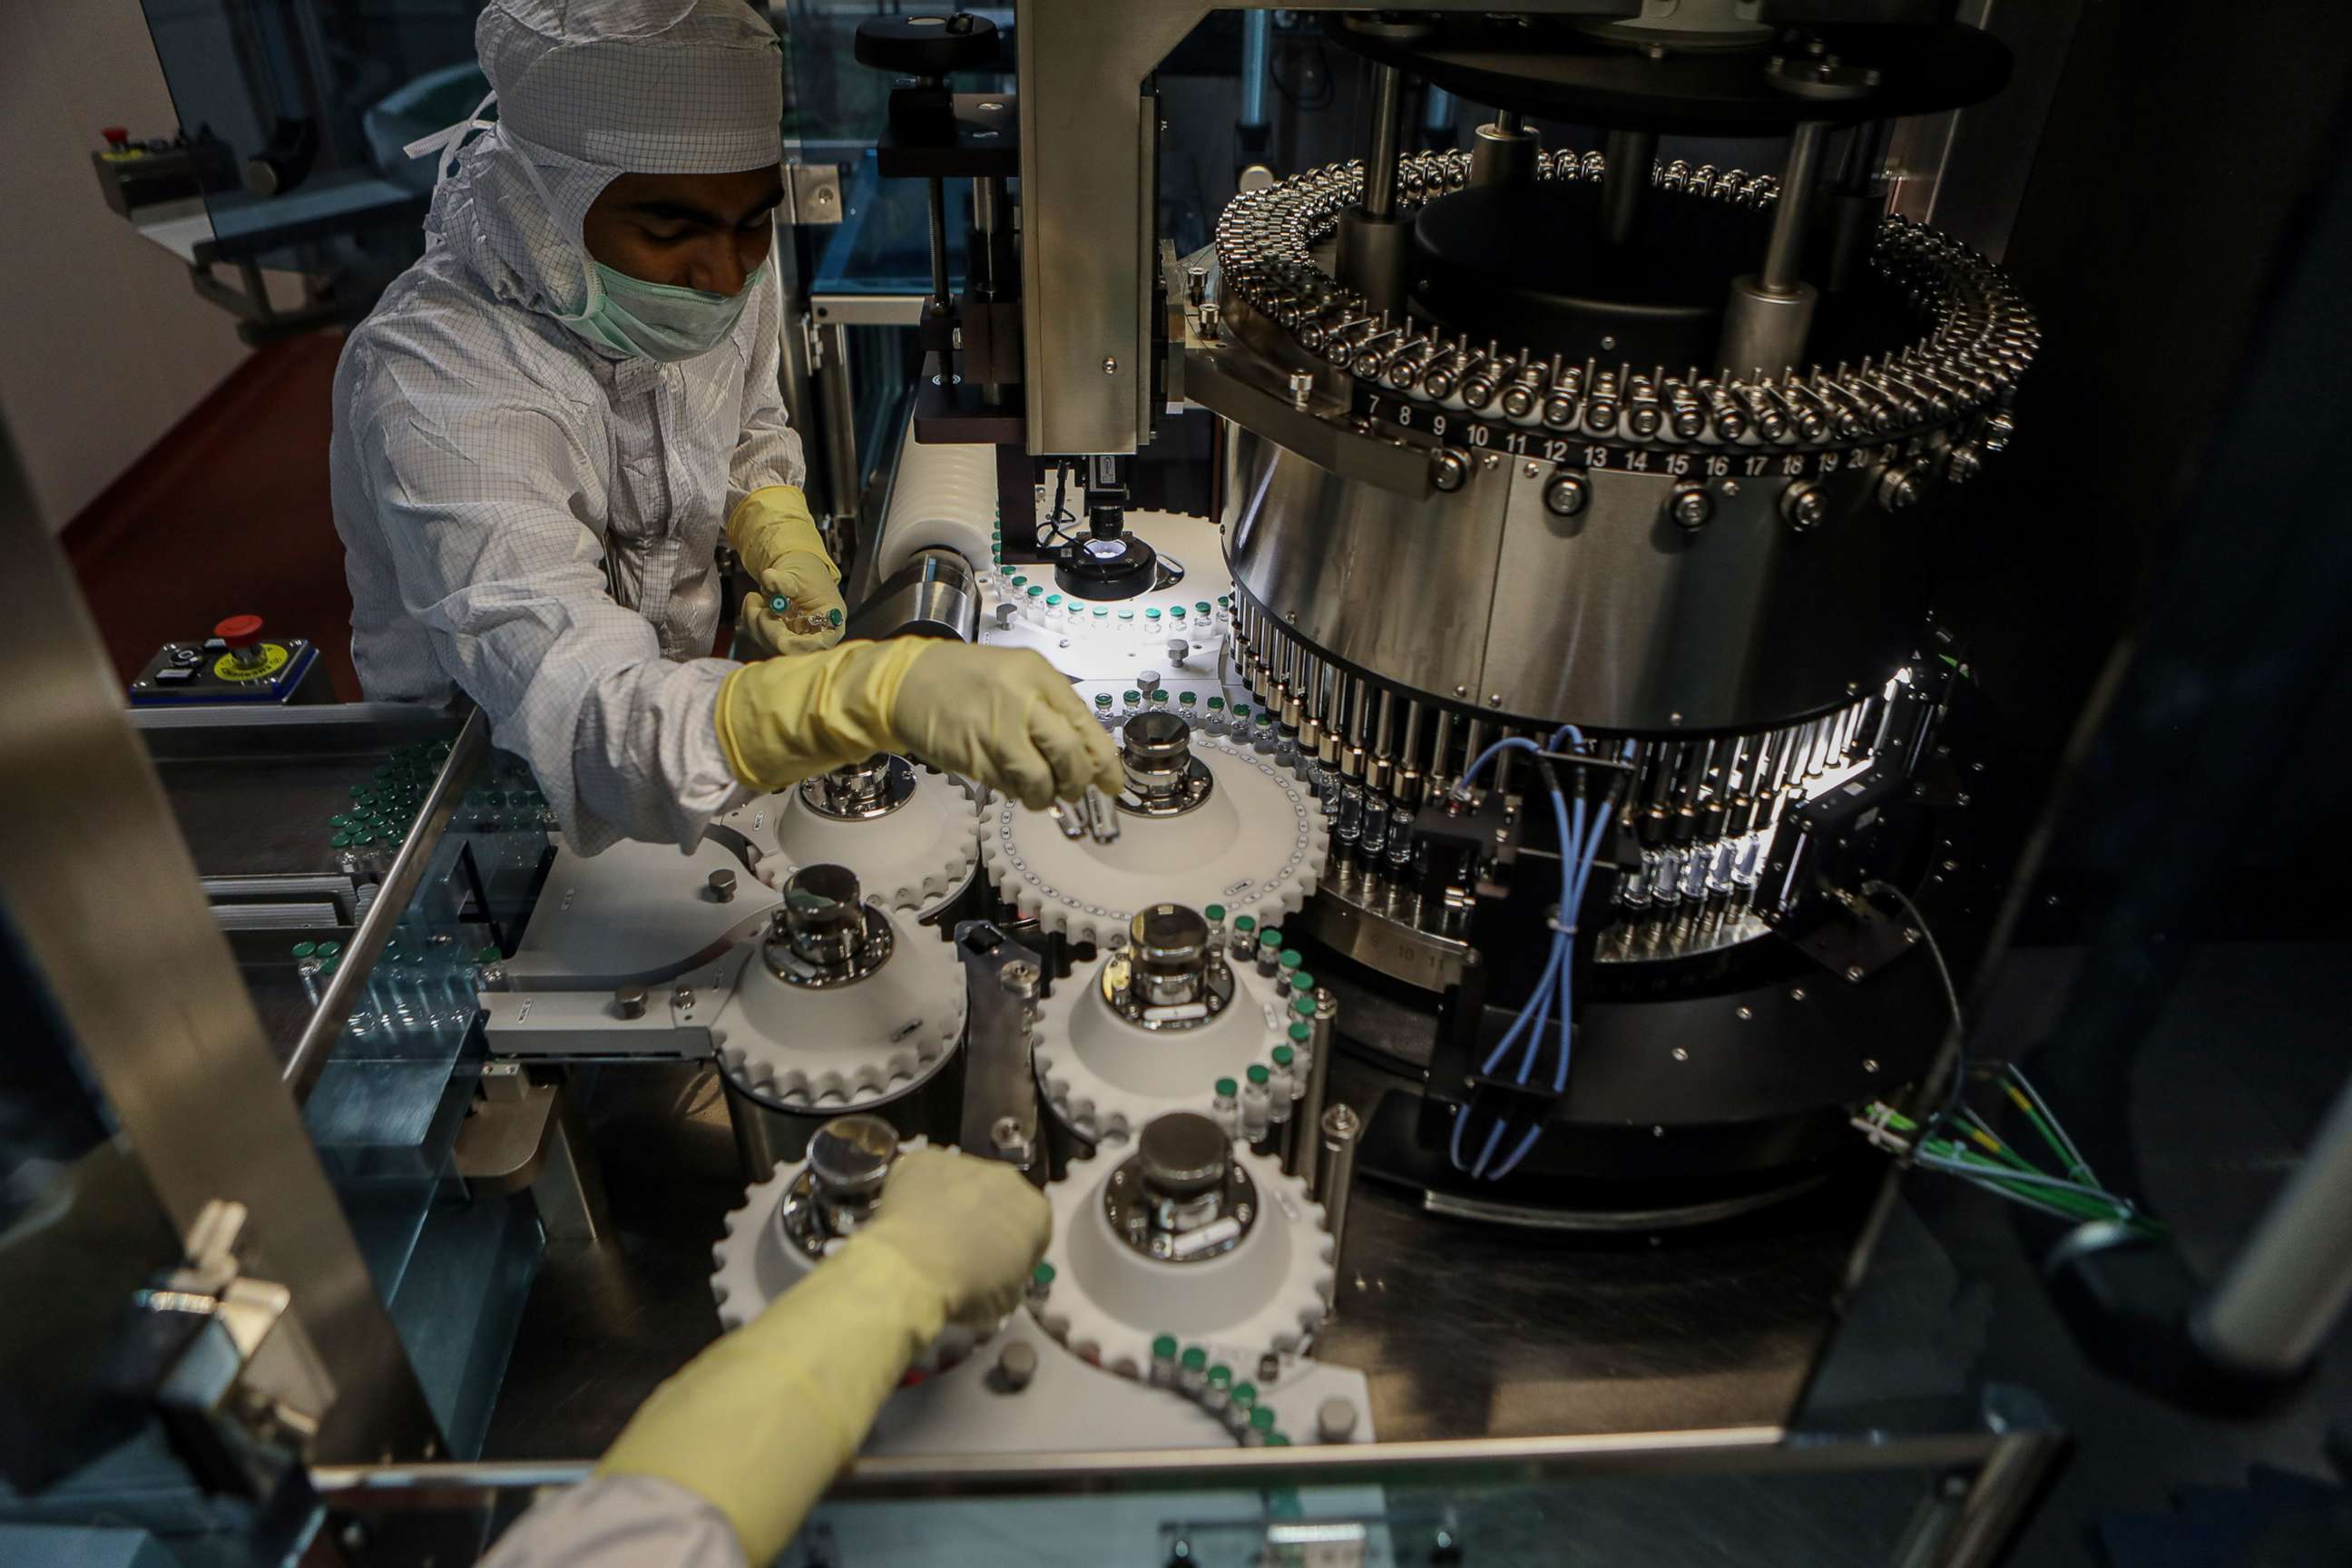 PHOTO: Employees work on the production line of a COVID-19 vaccine manufacturer for the COVAX facility in Pune, a city located in the western Indian state of Maharashtra, Feb. 24, 2021.